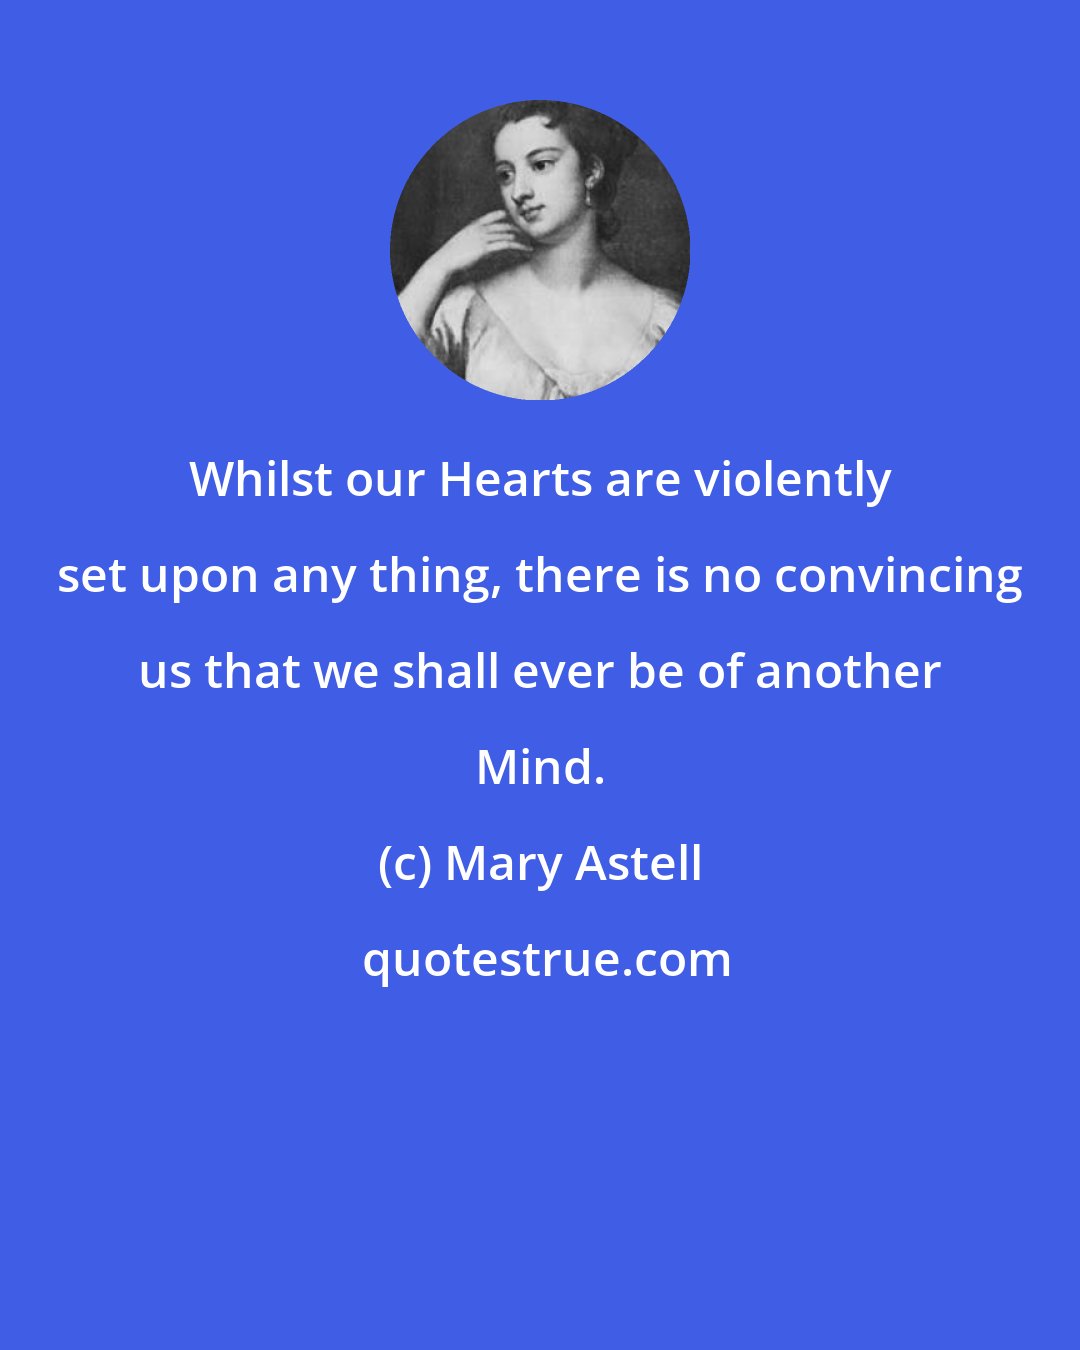 Mary Astell: Whilst our Hearts are violently set upon any thing, there is no convincing us that we shall ever be of another Mind.